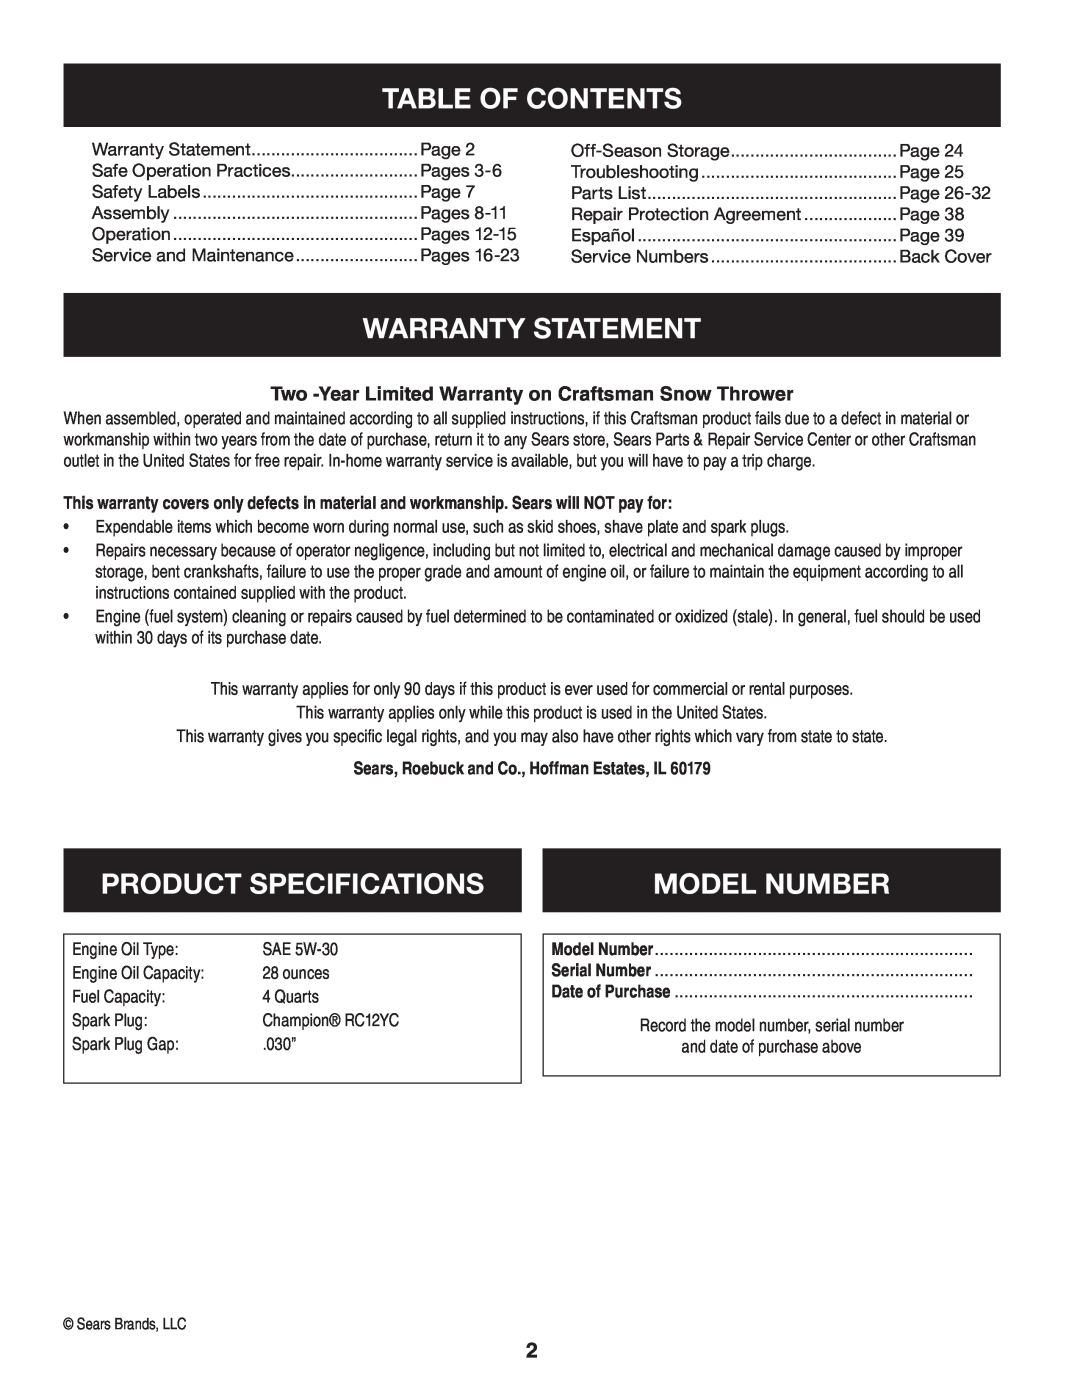 Craftsman 247.88845 manual Table Of Contents, Warranty Statement, Product Specifications, Model Number 